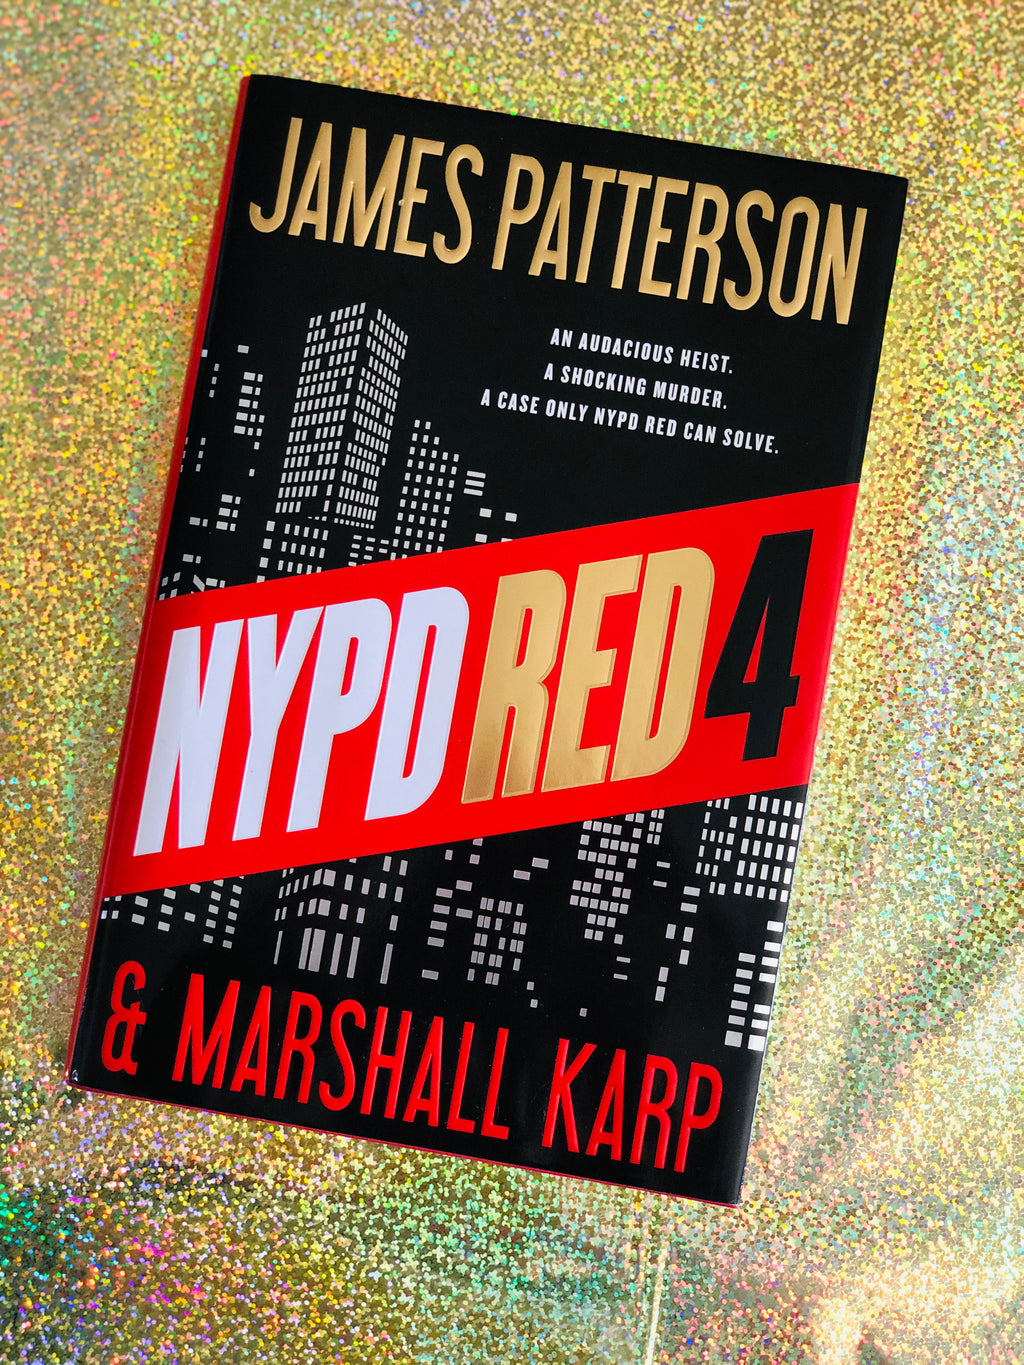 NYPD Red 4- By James Patterson & Marshall Karp